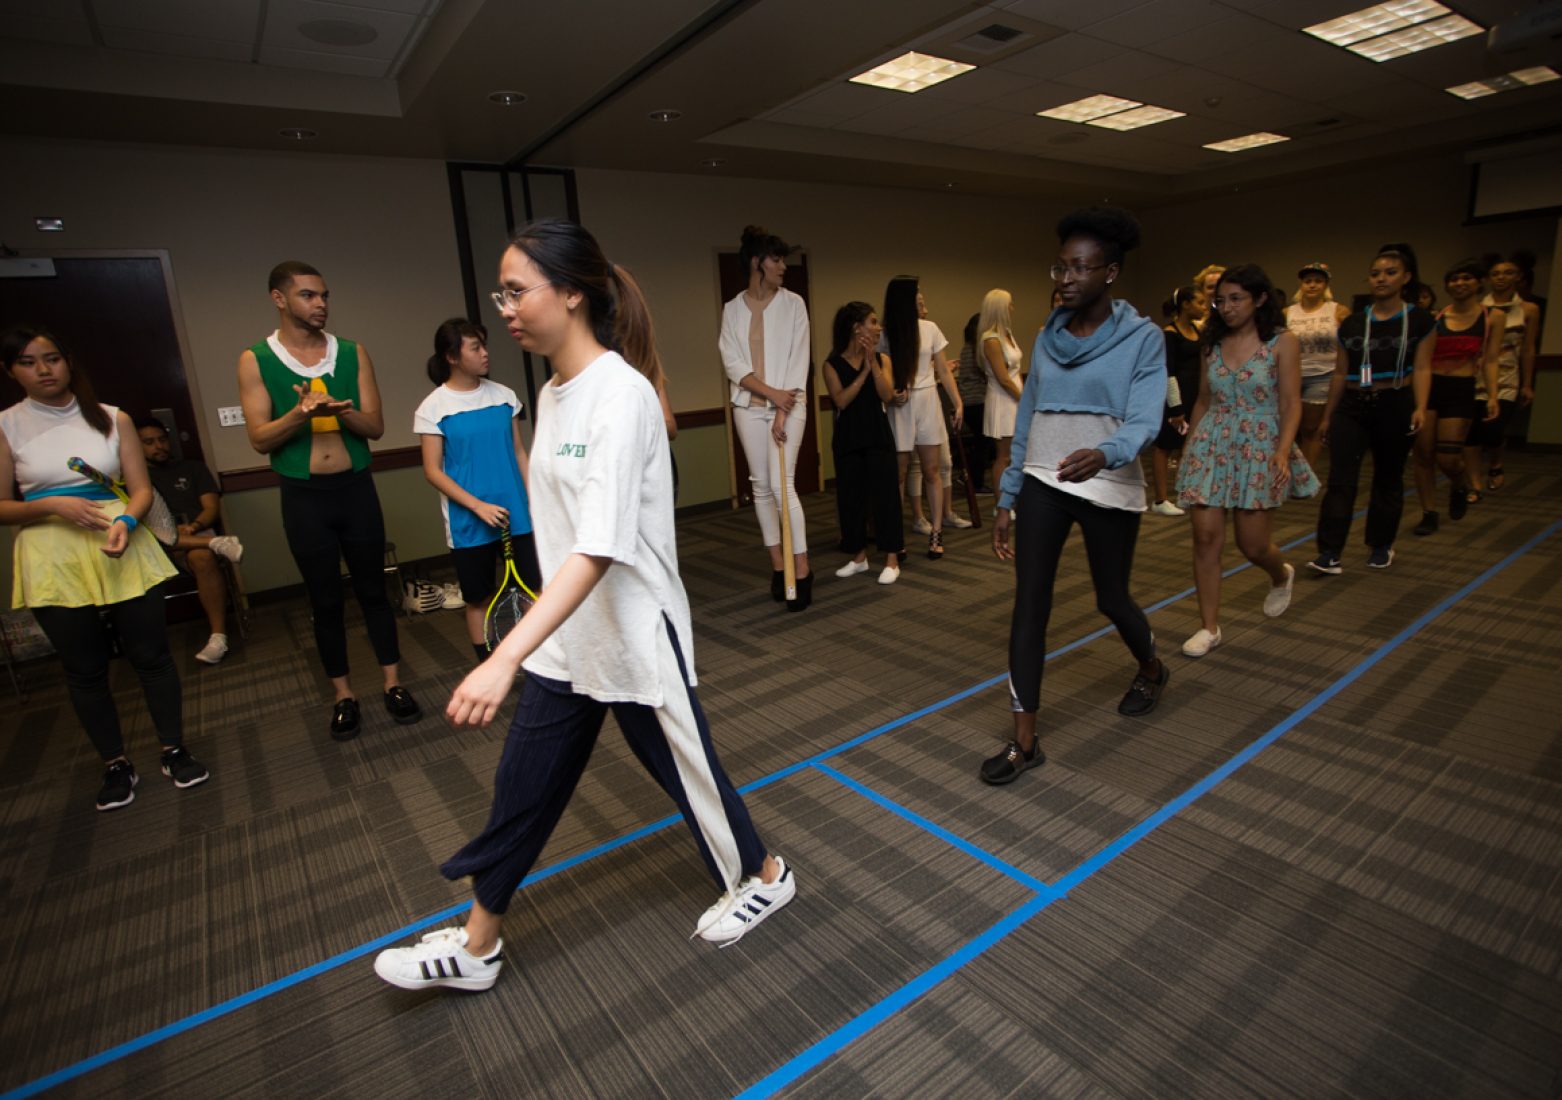 Members from the Student Fashion Association, models and volunteers practice the show’s timing during rehearsal in the University Union Foothill Suite on Wednesday. (Photo by Nicole Fowler)